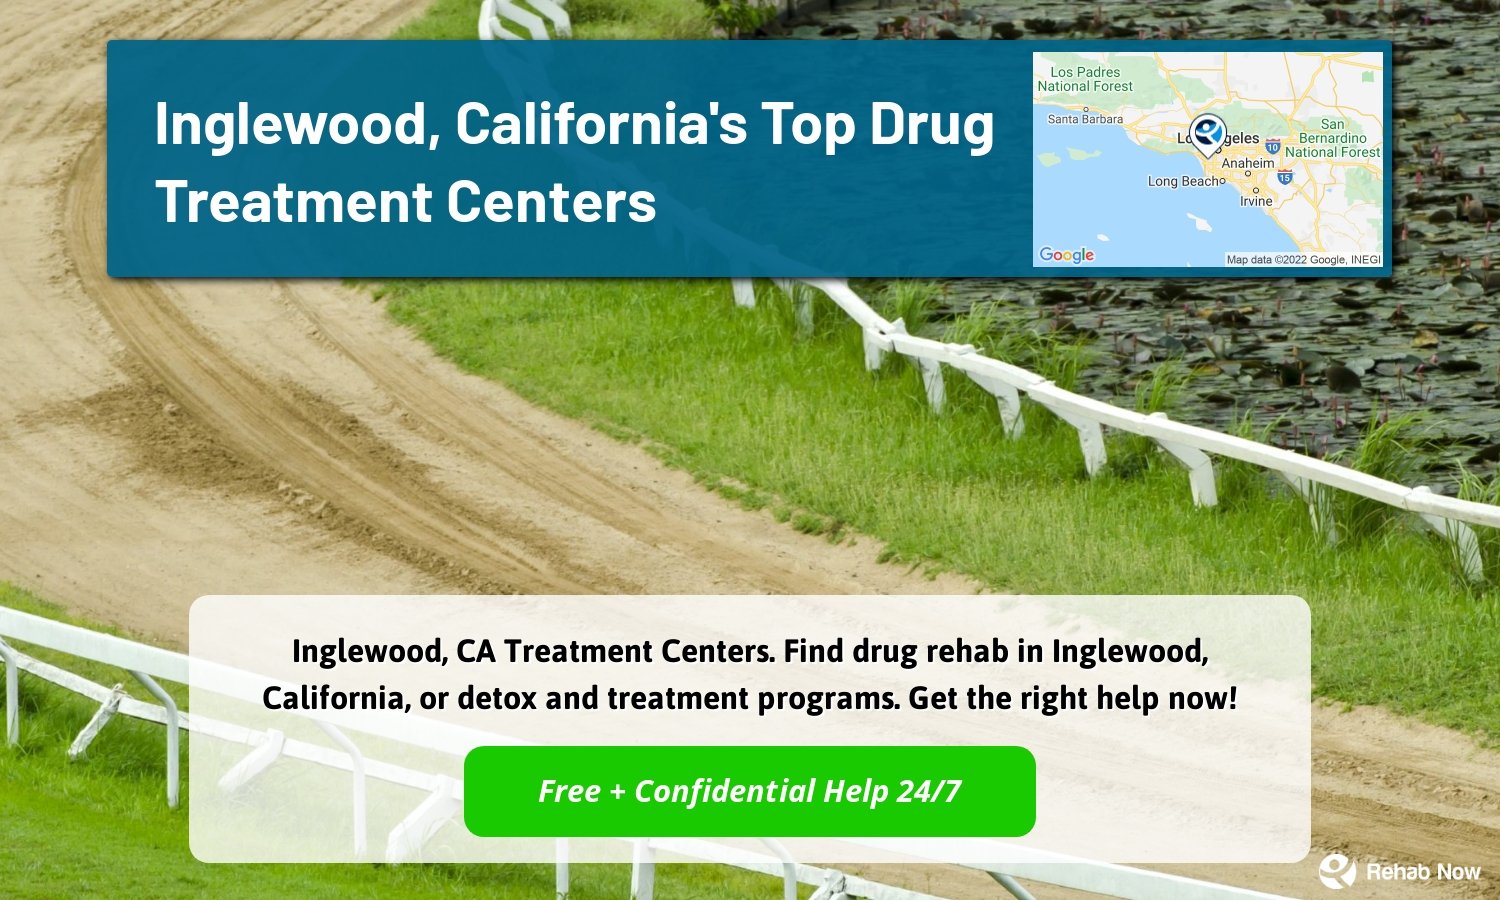 Inglewood, CA Treatment Centers. Find drug rehab in Inglewood, California, or detox and treatment programs. Get the right help now!